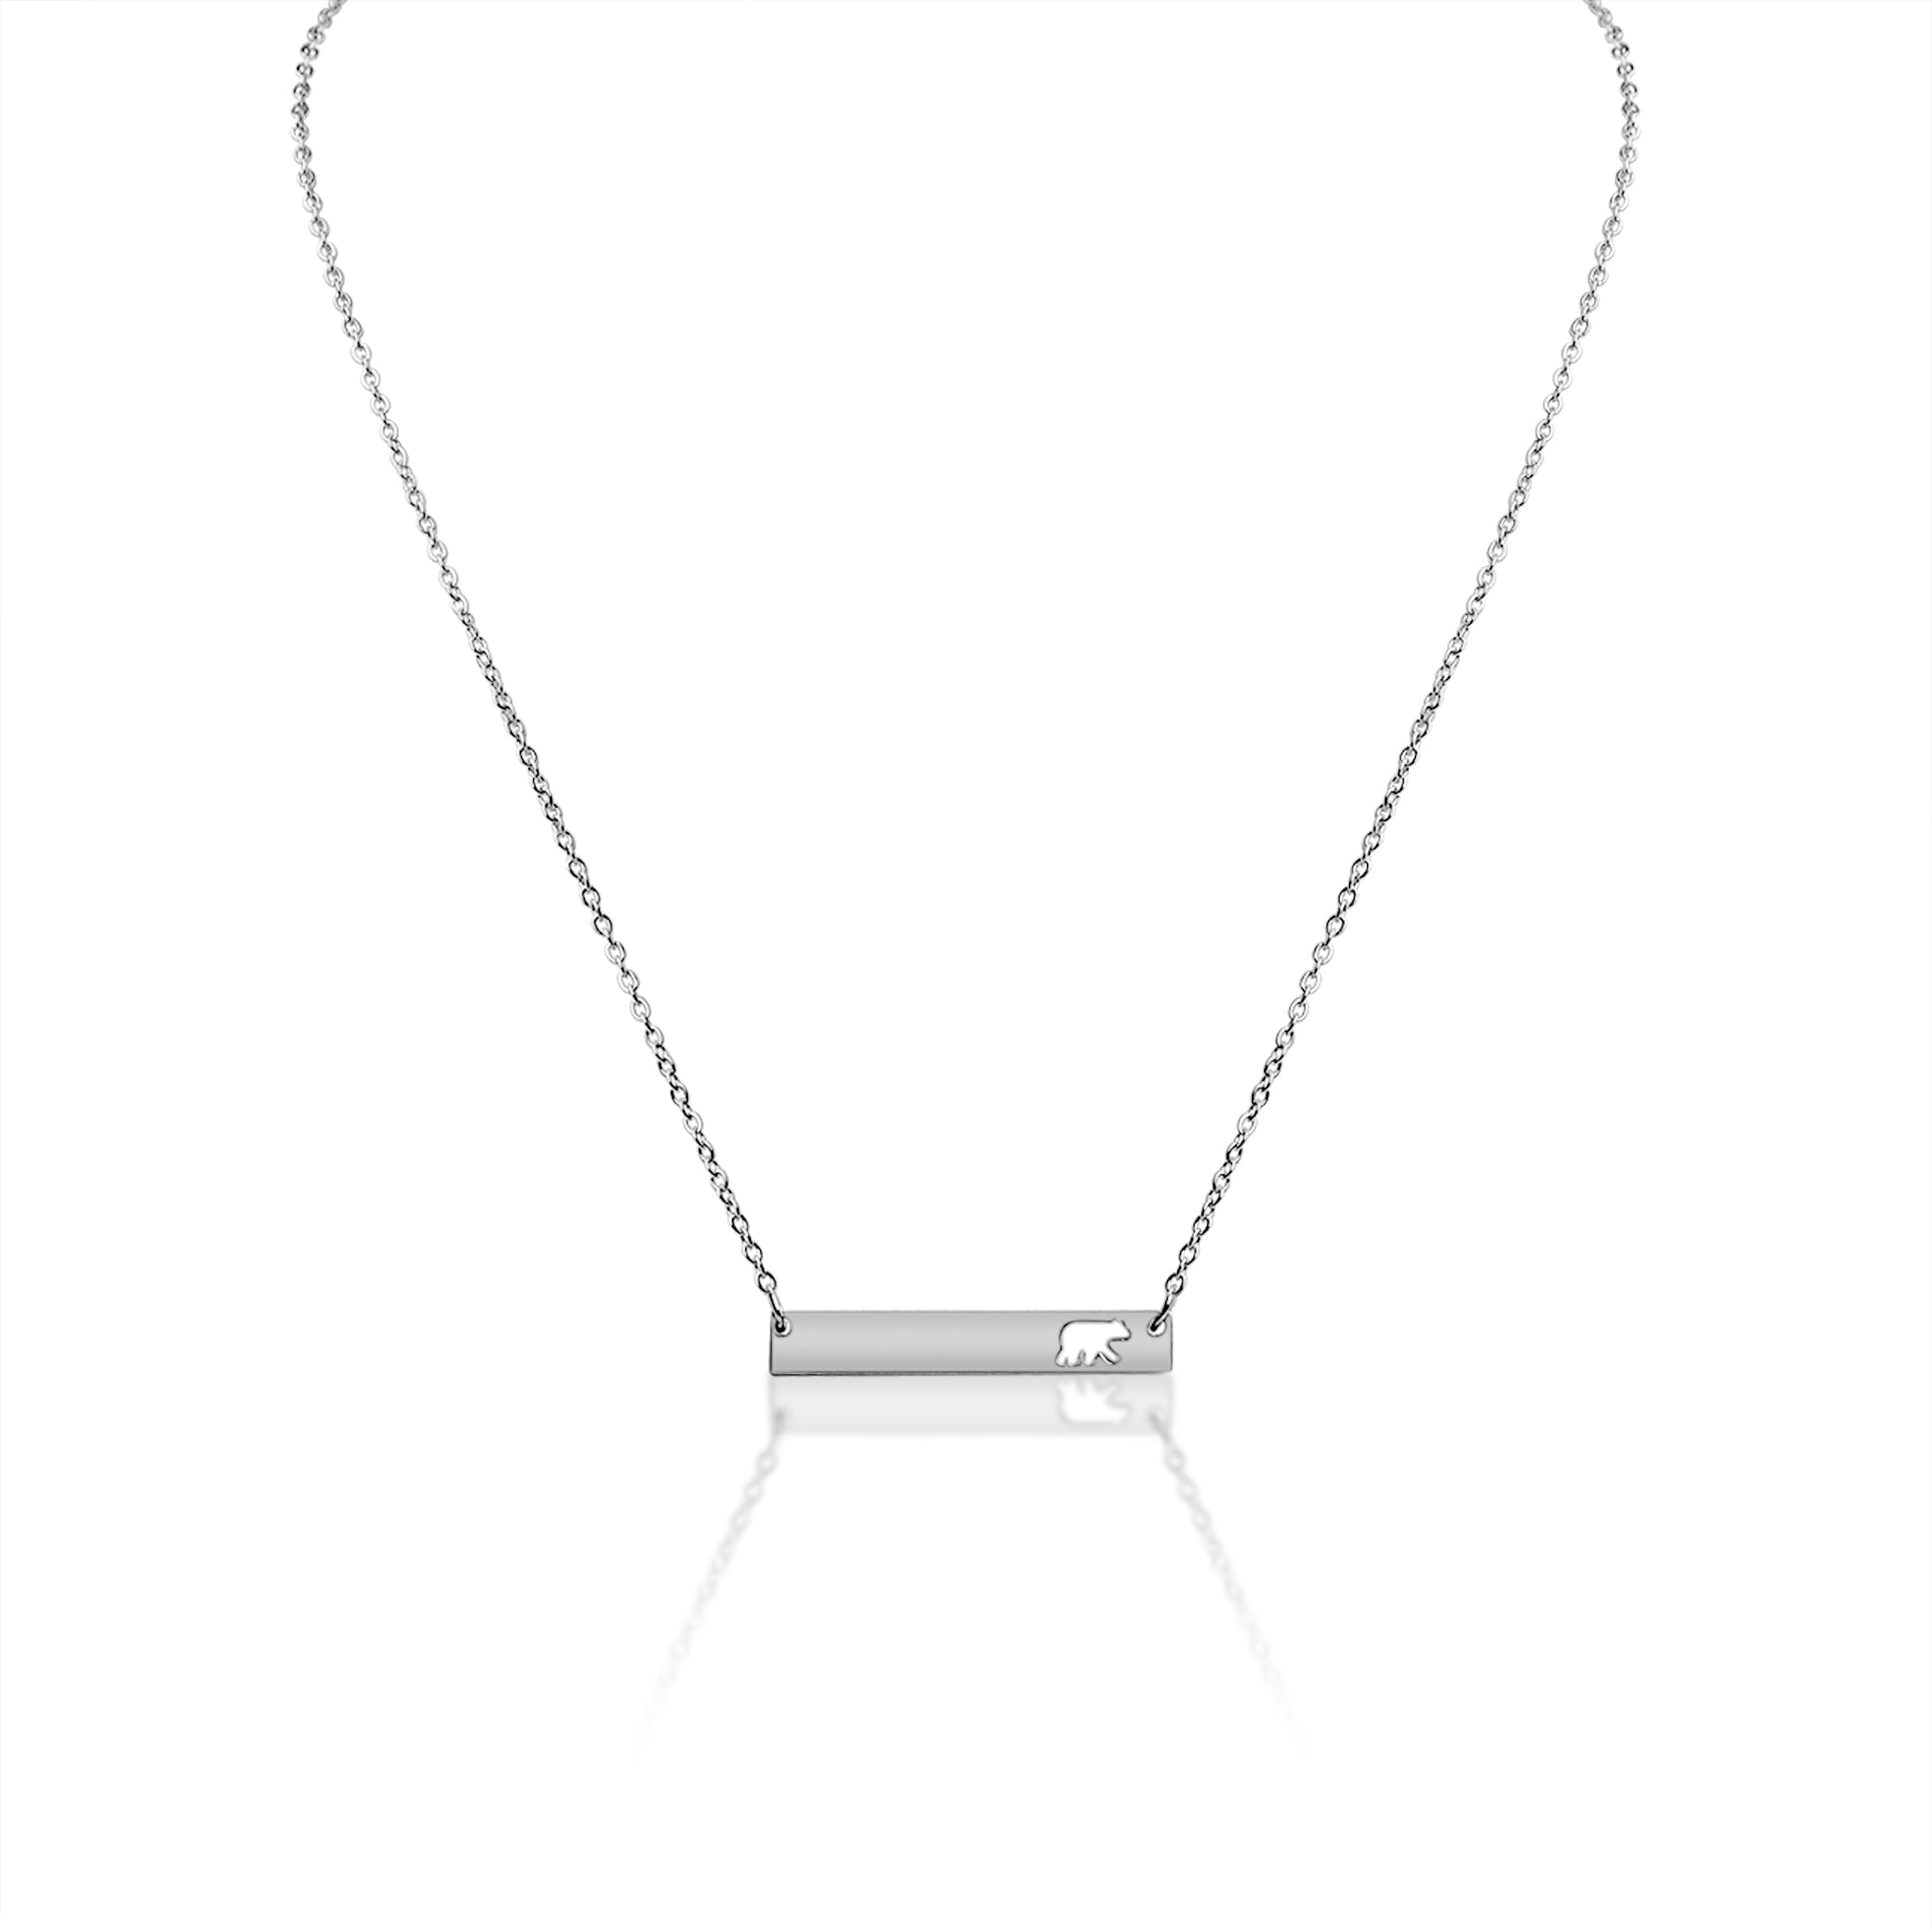 Necklace Women's Stainless Steel Chant Bah48